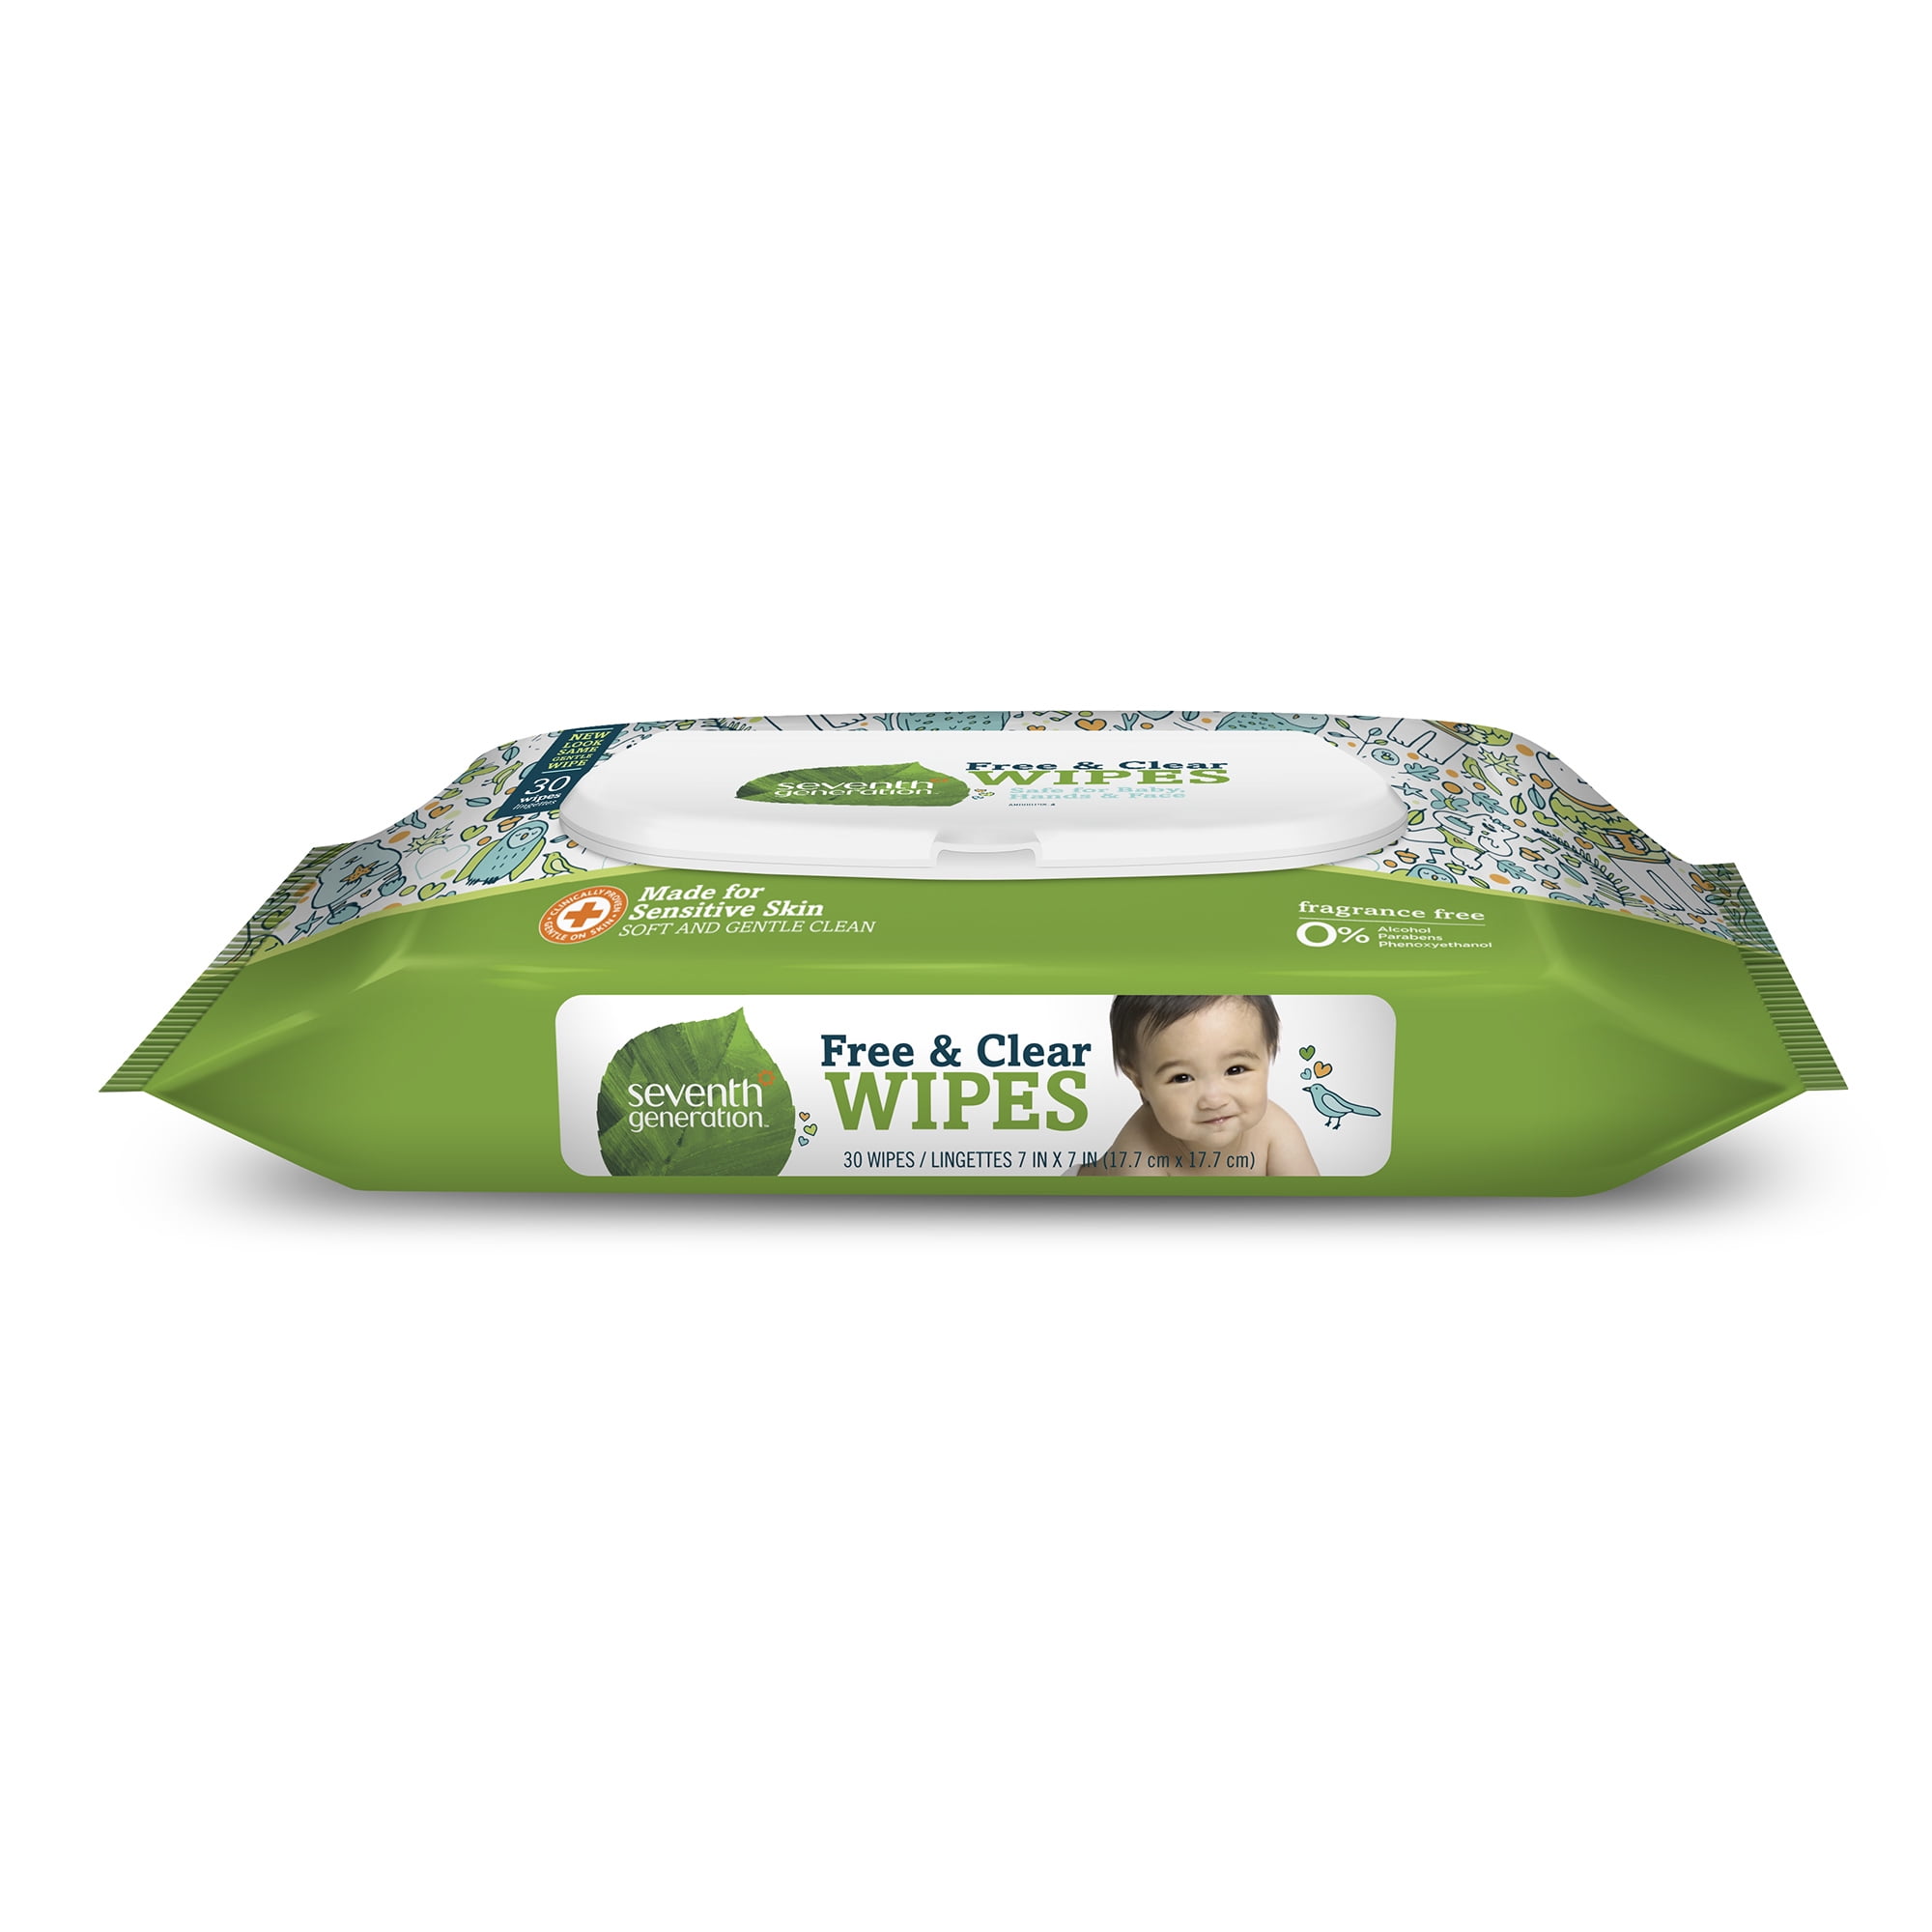  Frida Baby Breathefrida Vapor Wipes for Nose or Chest, 30 Count  (Pack of 1) : Baby